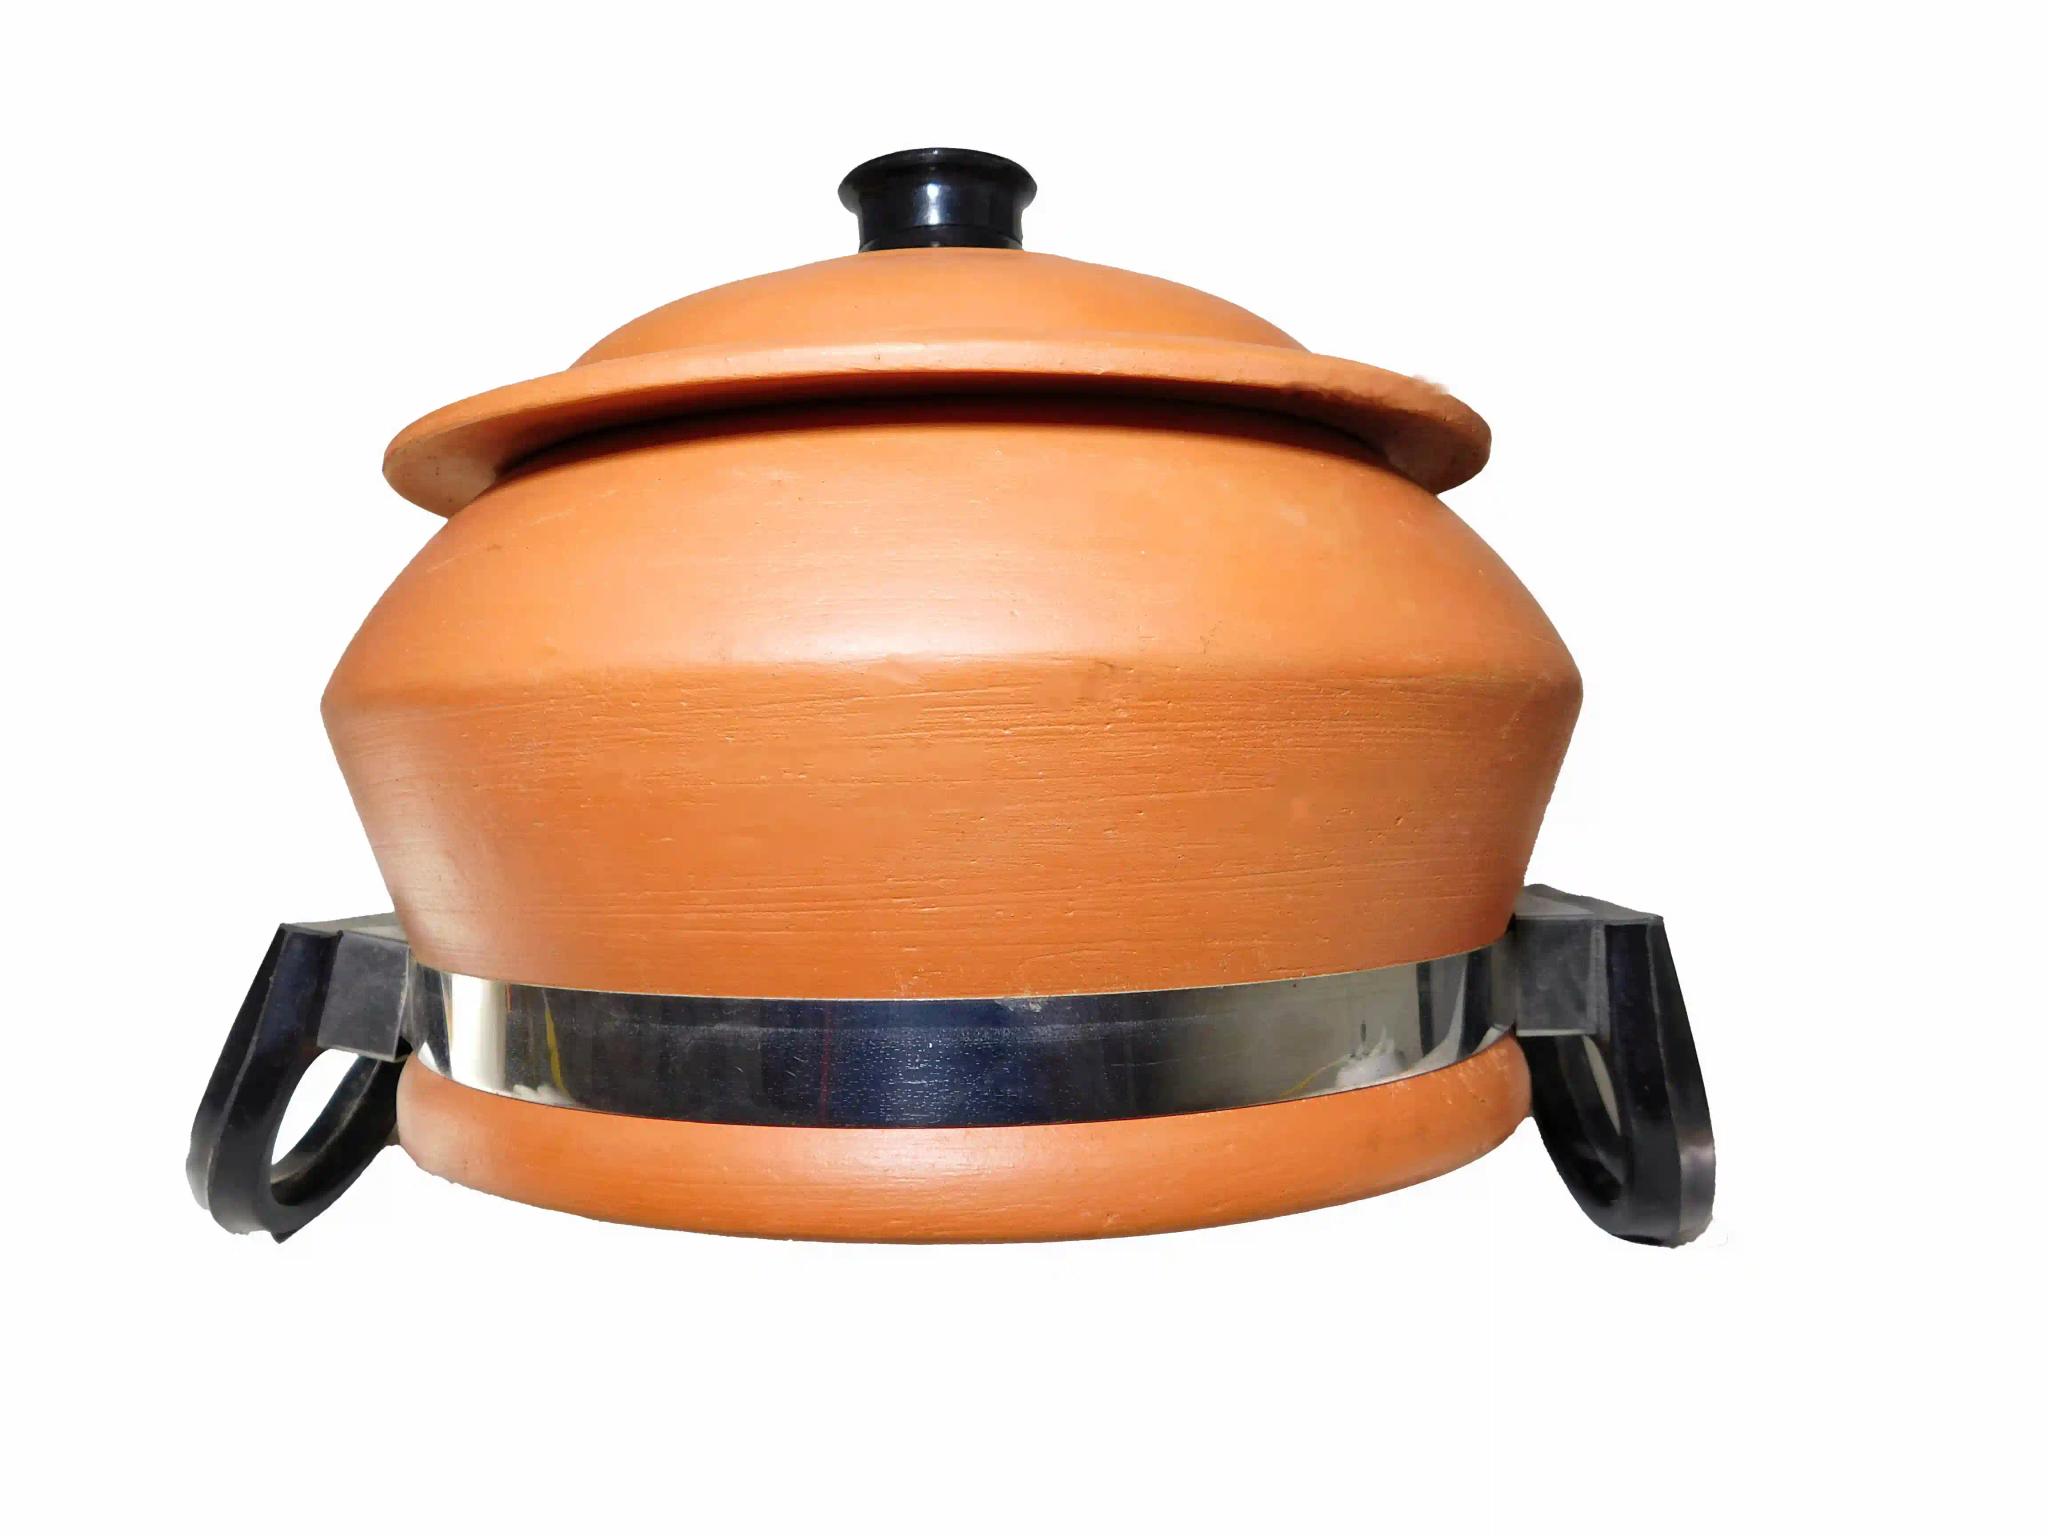 KSI Handi for Cooking and Serving with Lid Serving Bowl Wooden Spatula Combo Clay Pot Terracotta Handmade Mud Mitti Ke Bartan Pot Uncoated Pottery Storage Earthen India 3.5 Litre Lightweight & Durable